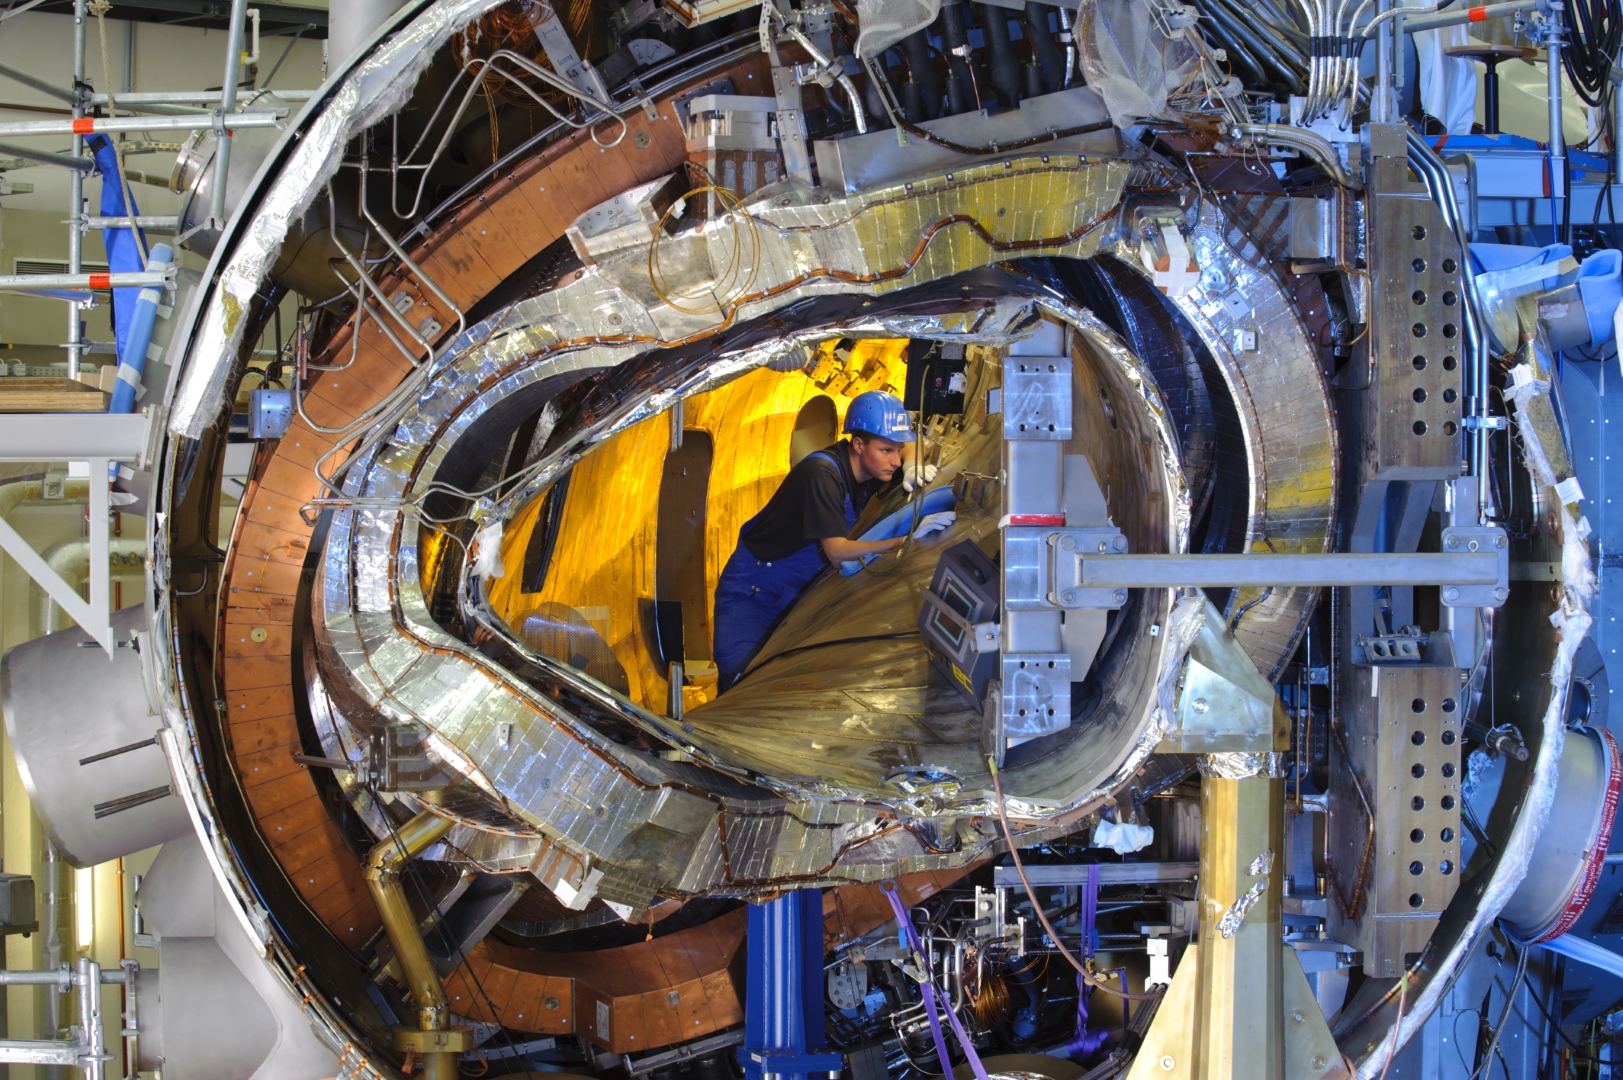 View inside: Visible are the plasma vessel, a magnet coil, the outer casing, numerous coolant ducts and power leads (photo credit: IPP)